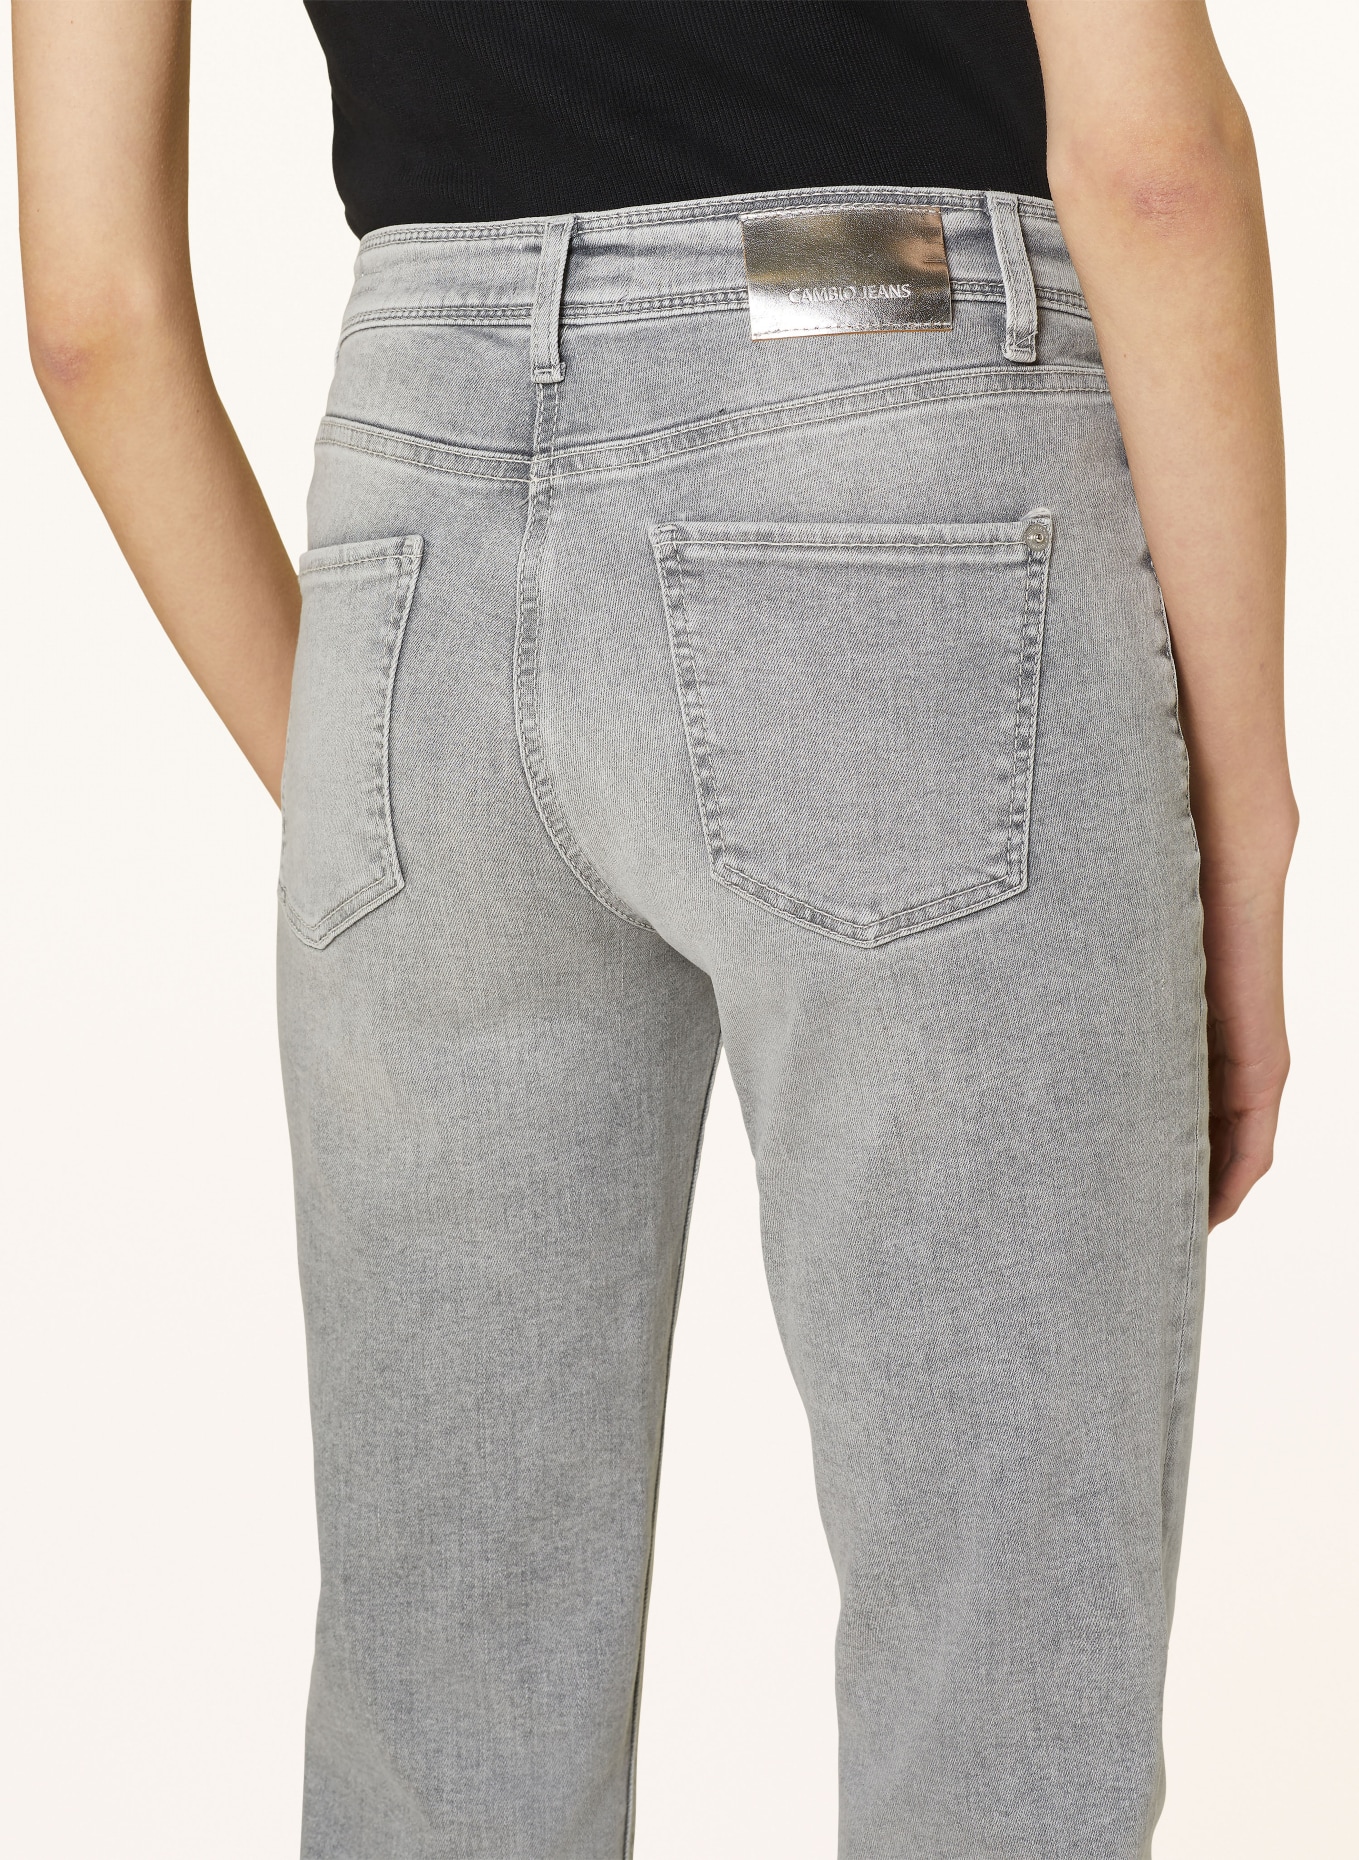 CAMBIO 7/8 jeans PIPER, Color: 5146 light grey fringed hem (Image 5)